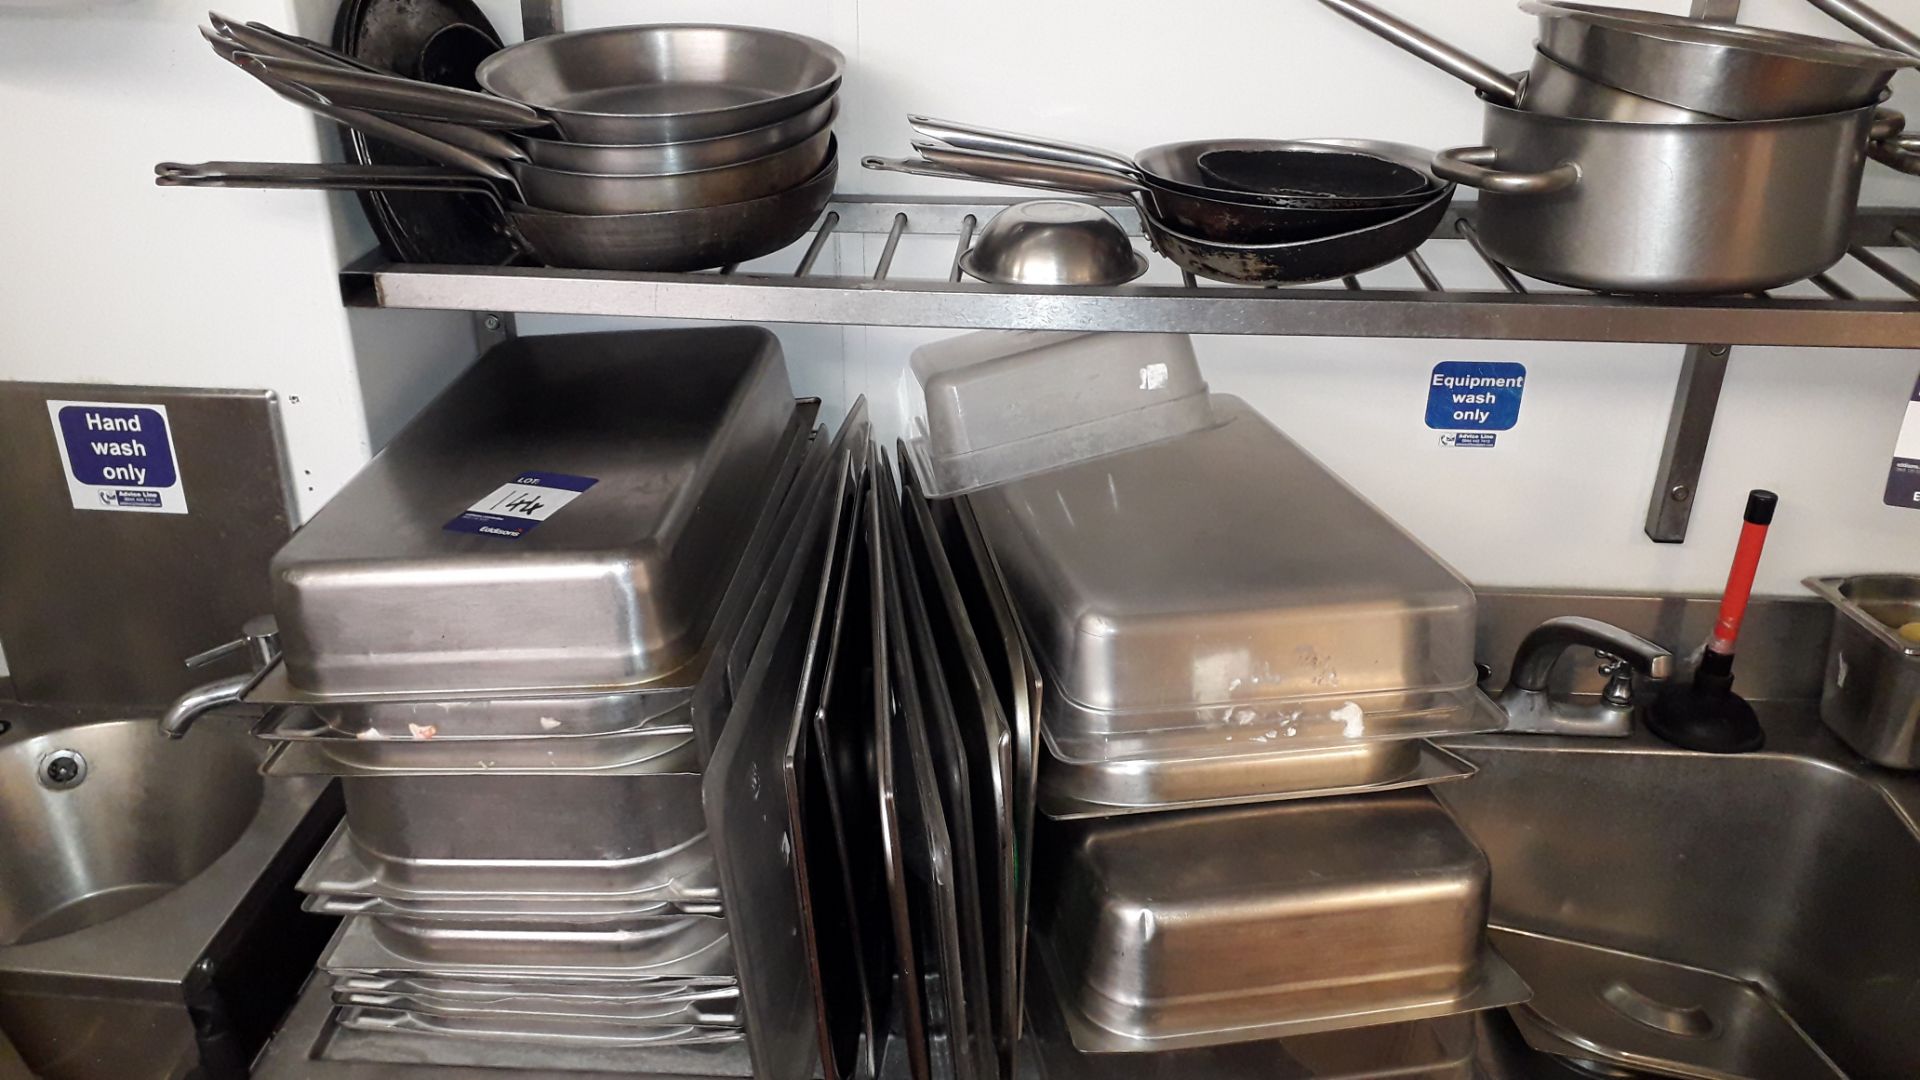 Large Quantity of Stainless Steel Gastronorme and other Trays to Kitchen - Image 5 of 8